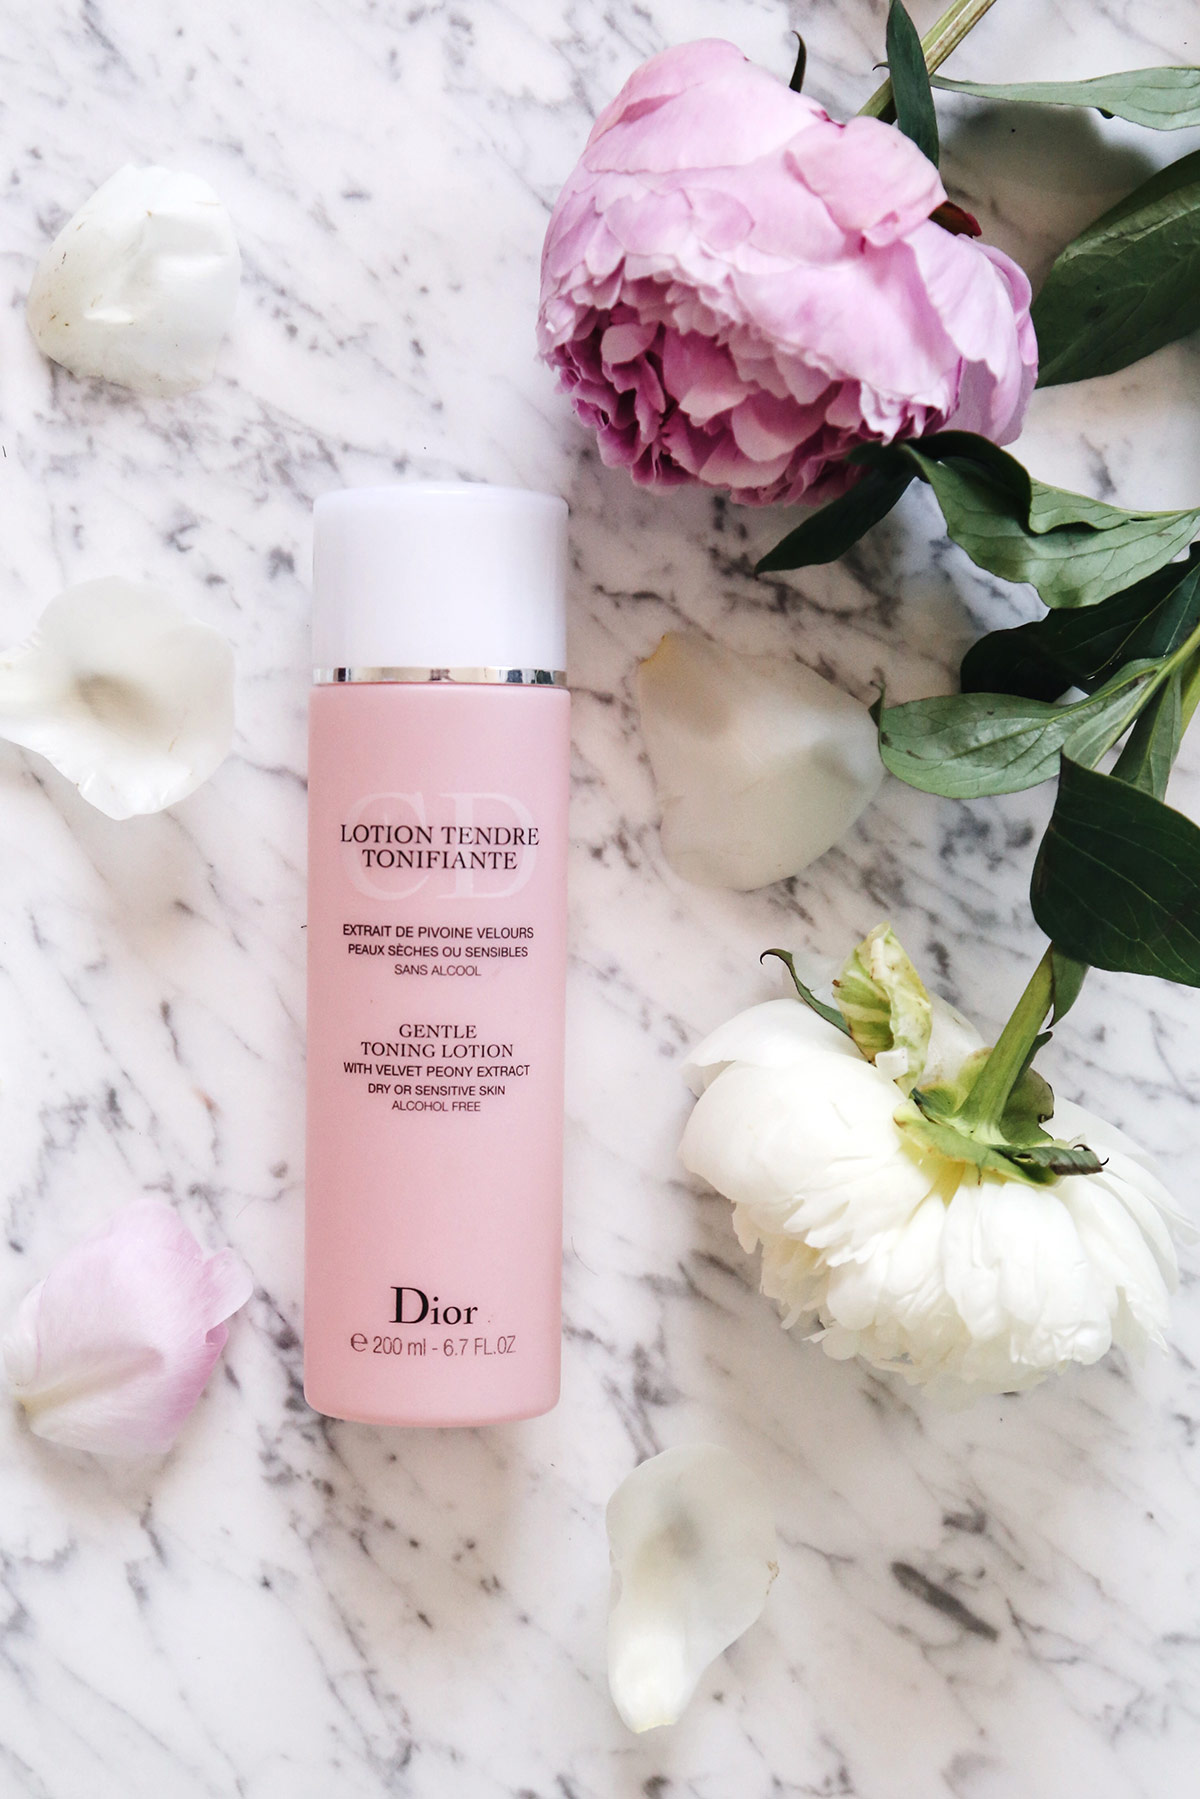 Dior makeup products lotion